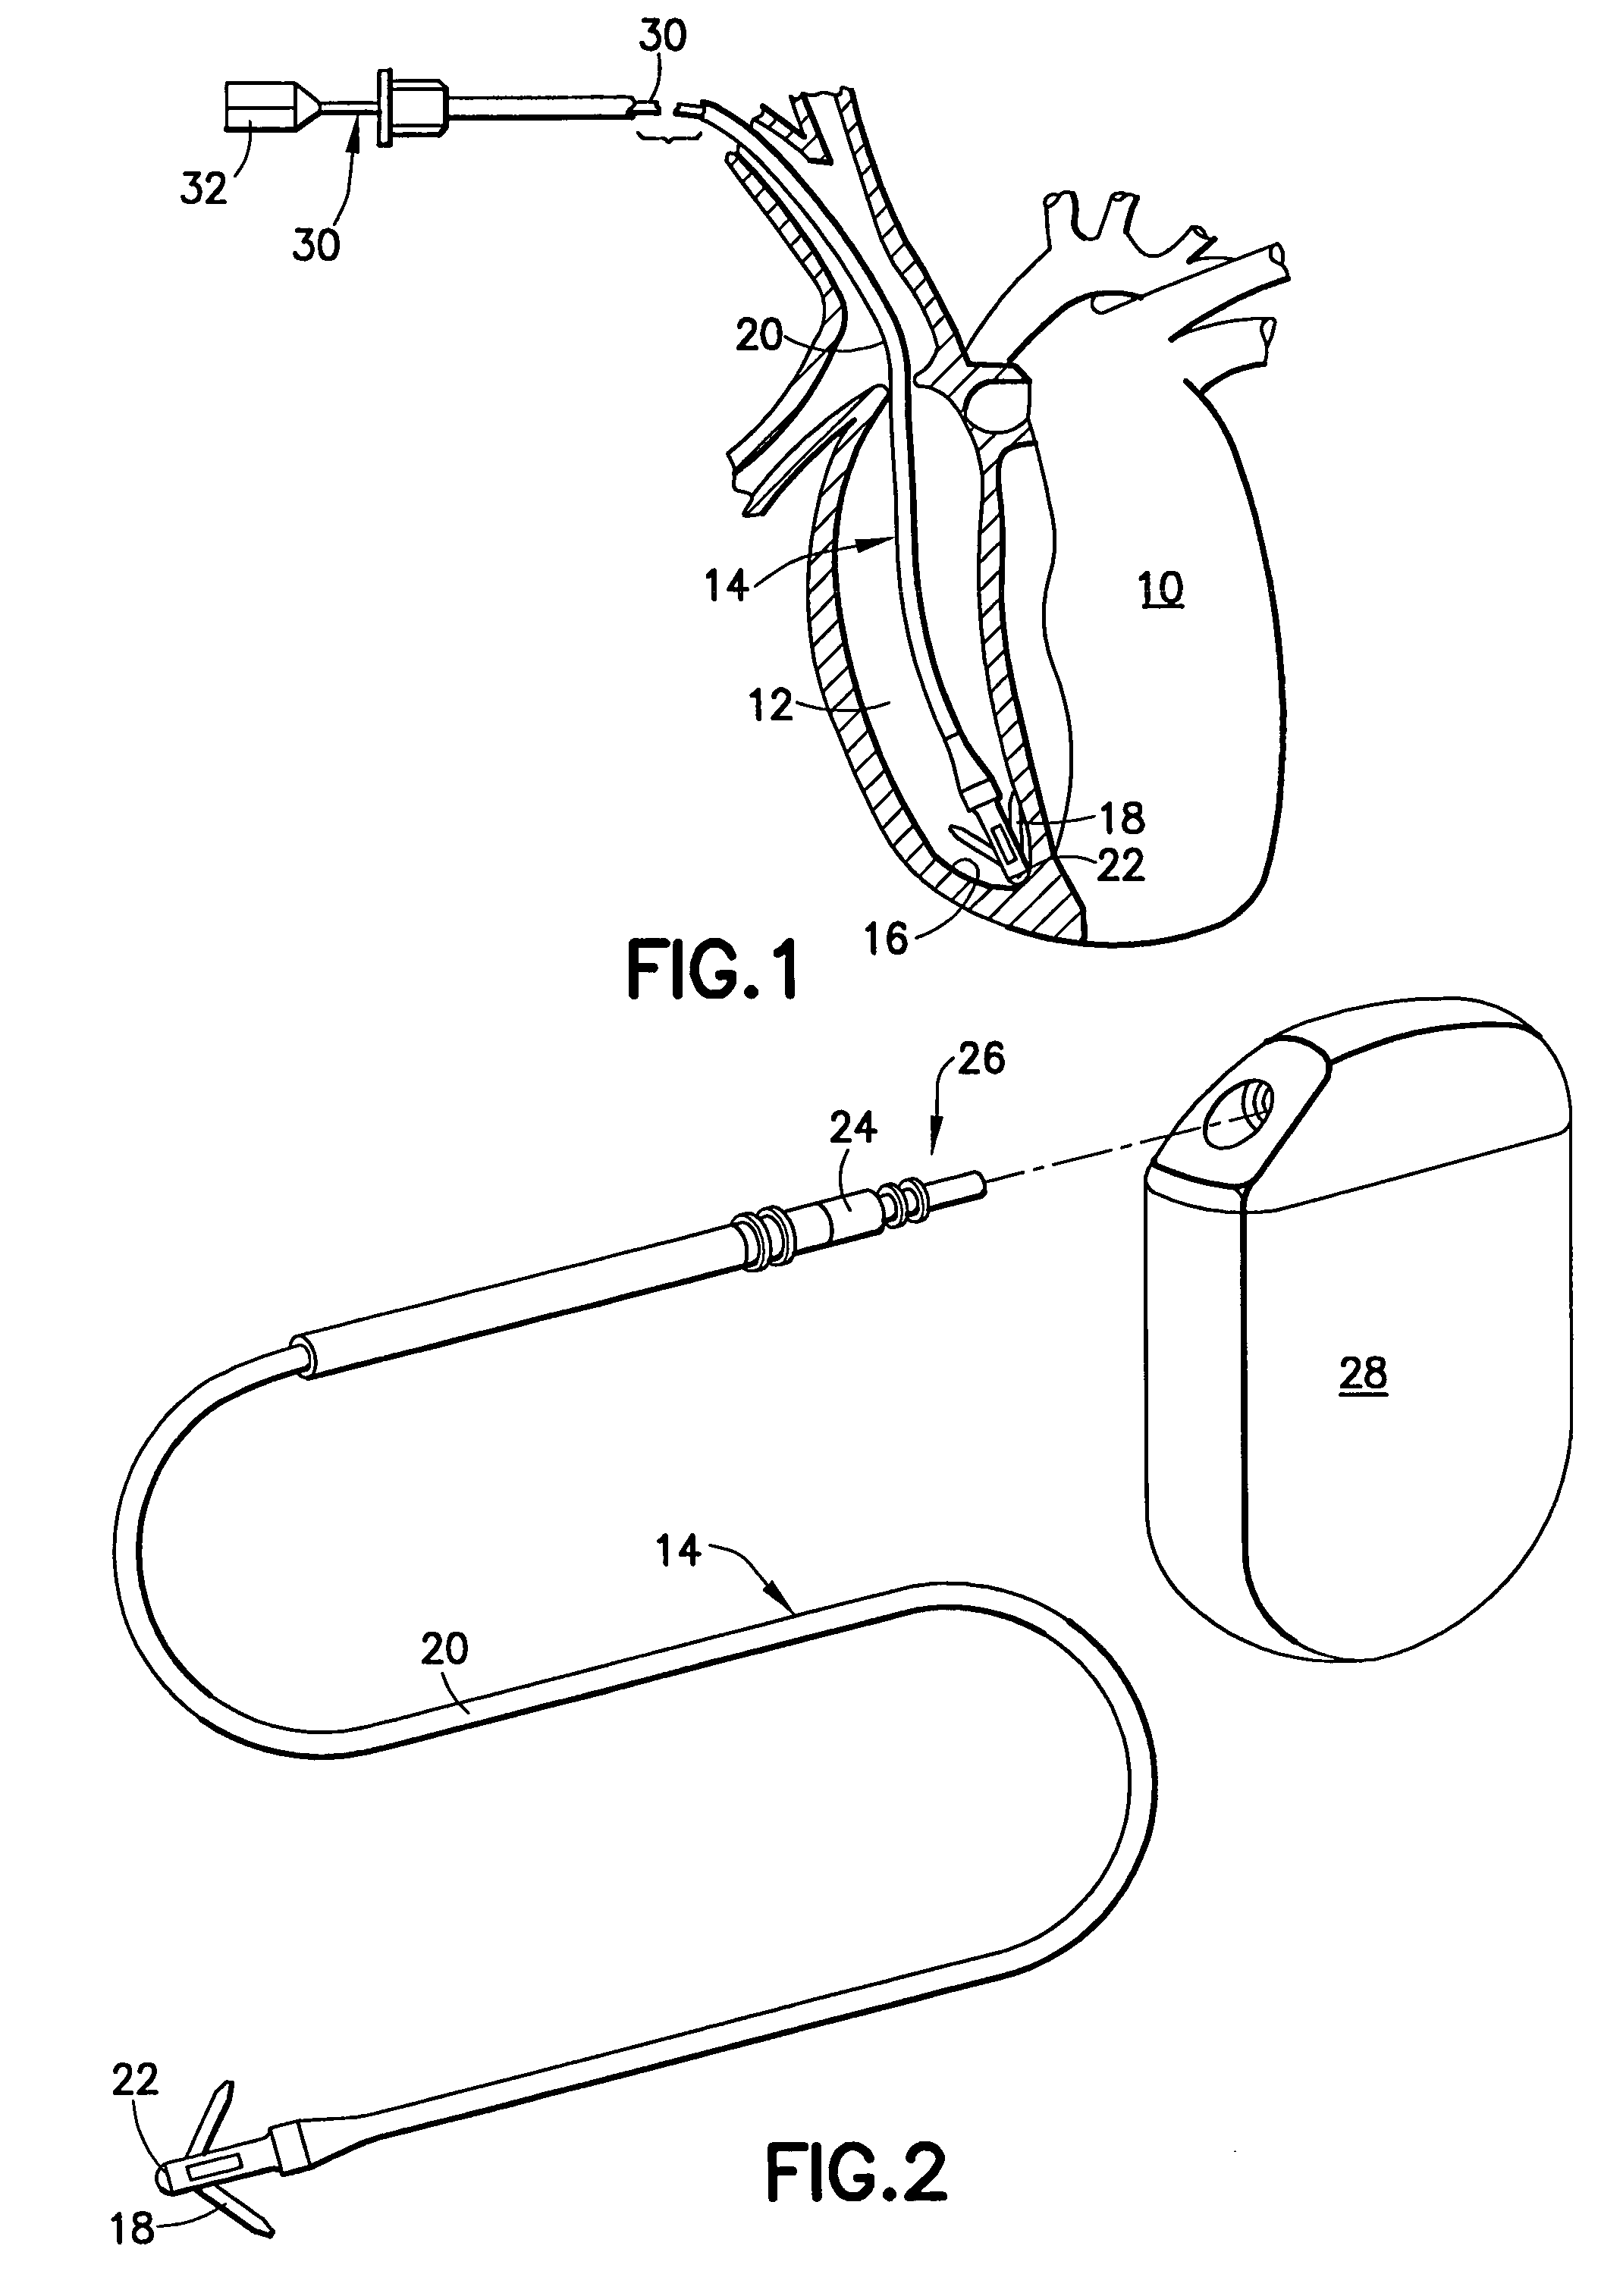 Construction of a medical electrical lead